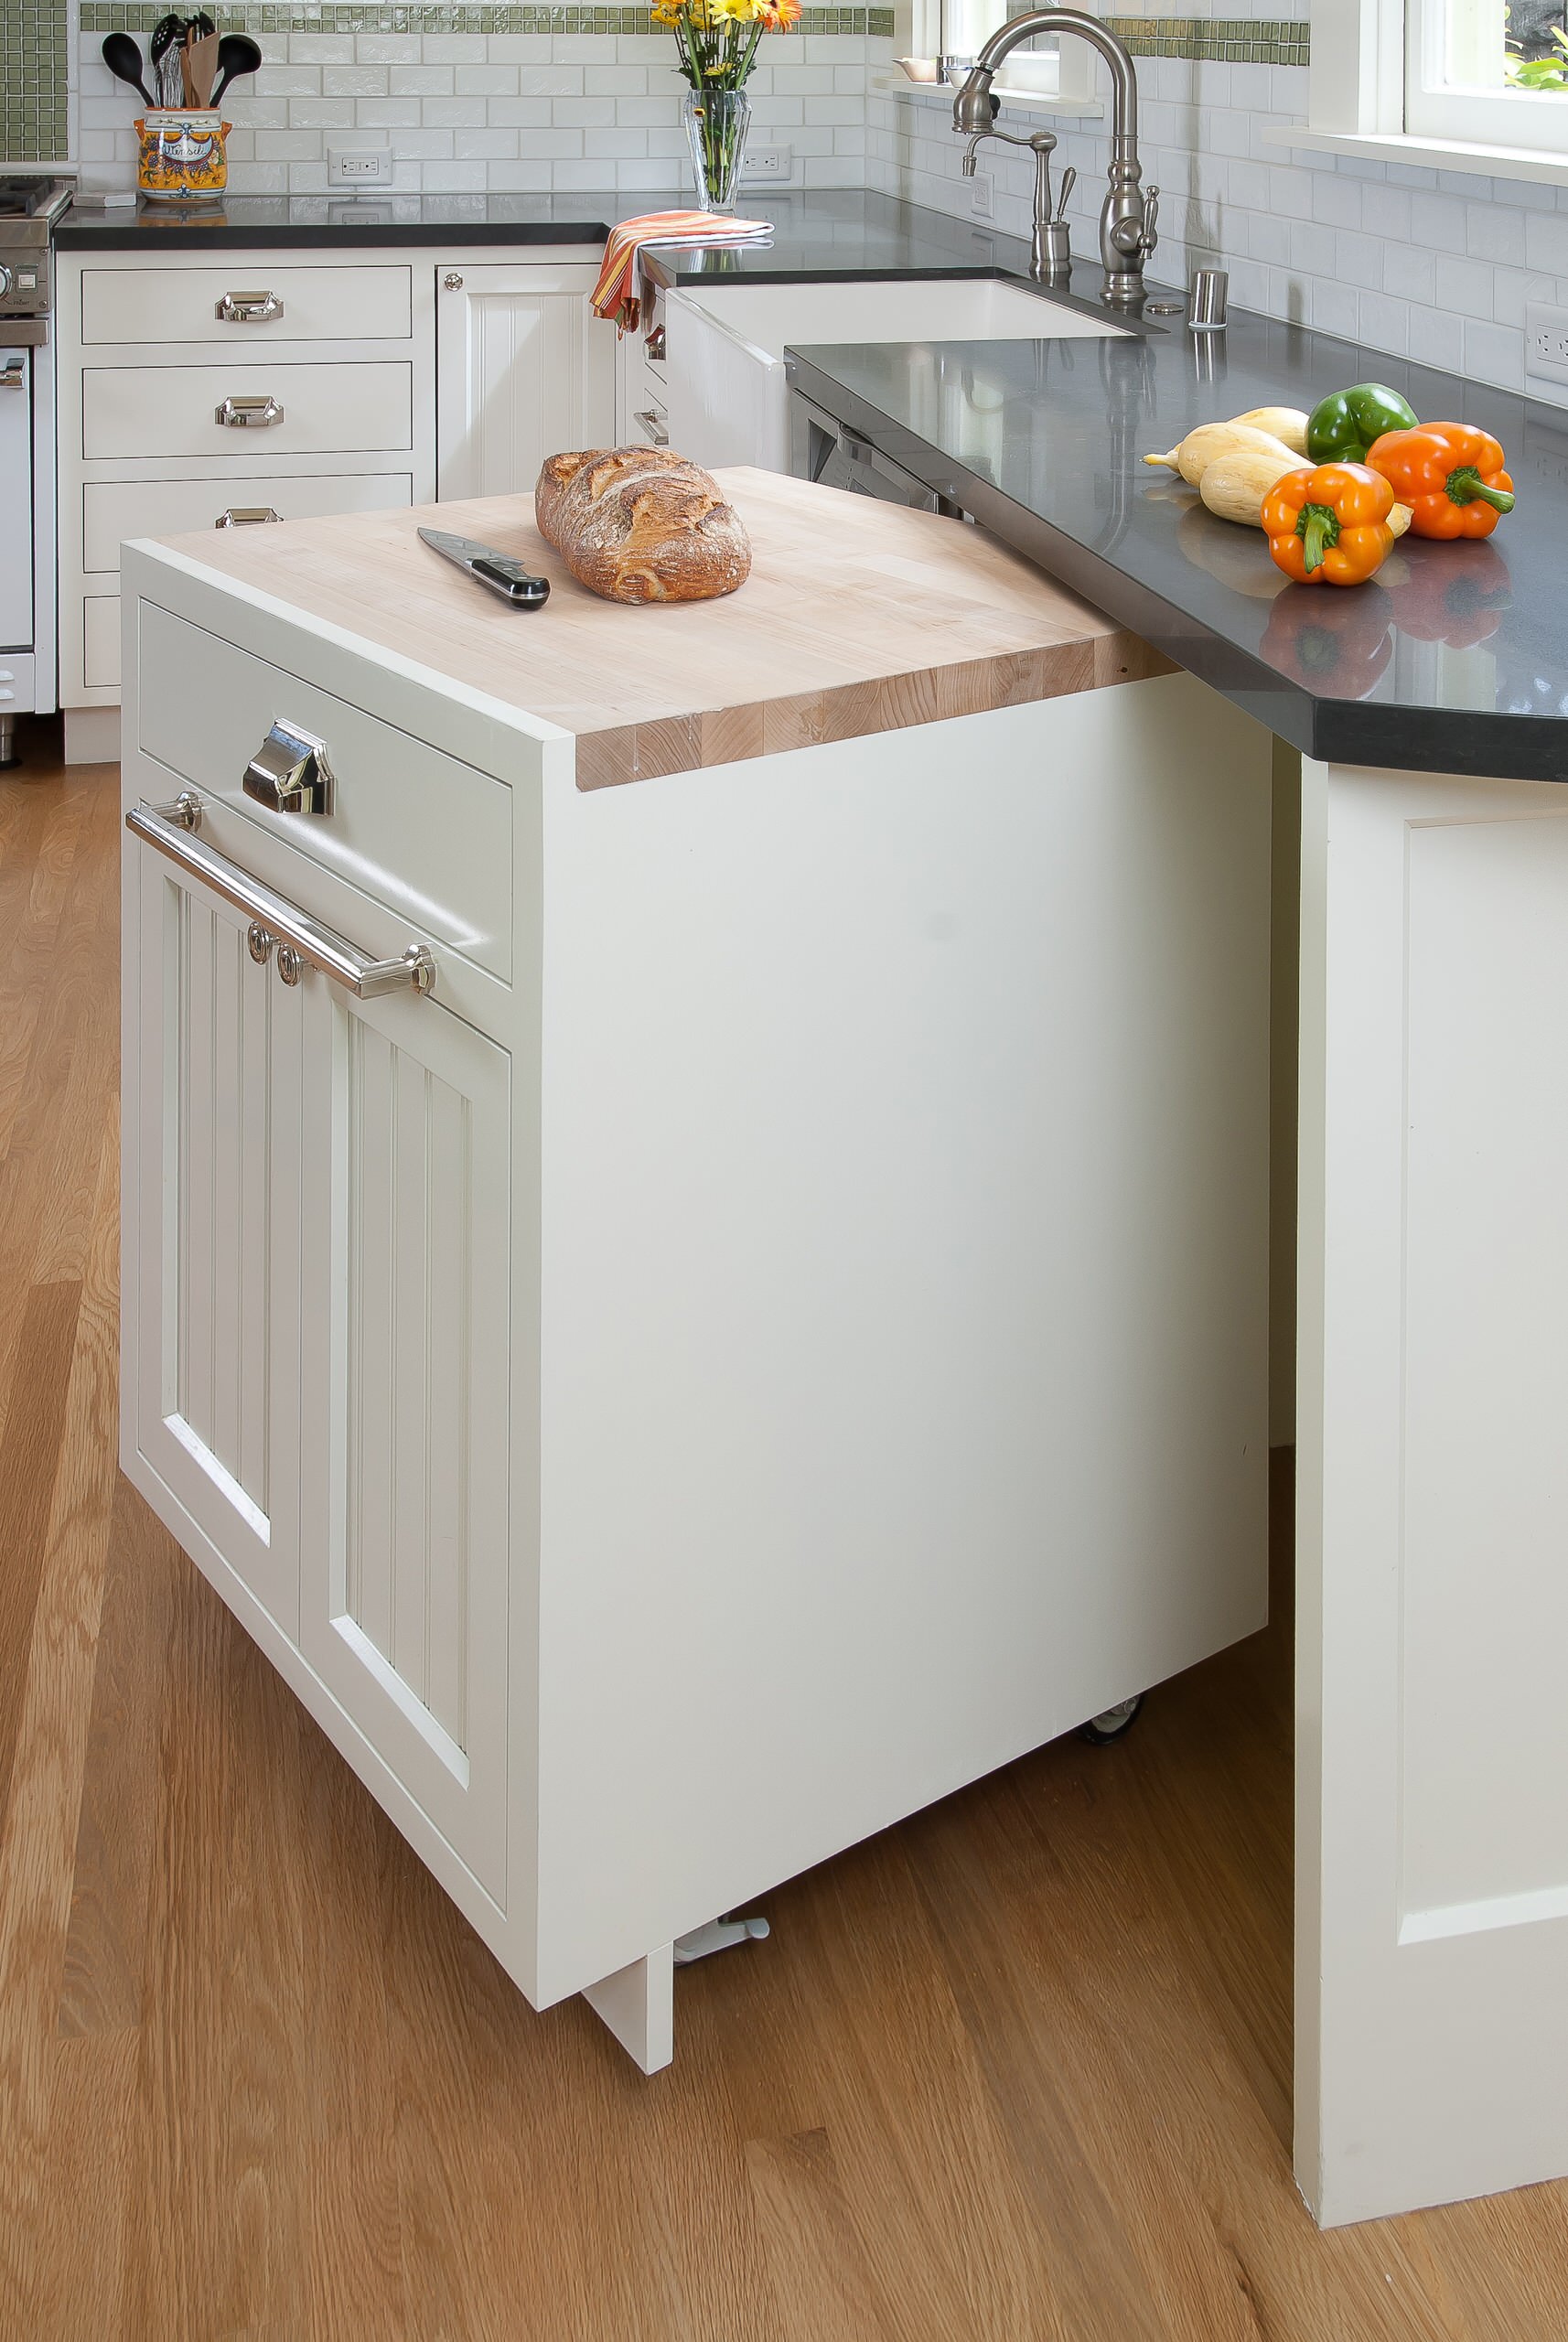 Installation of side out prep station 80+ Unusual Kitchen Design Ideas for Small Spaces - 1